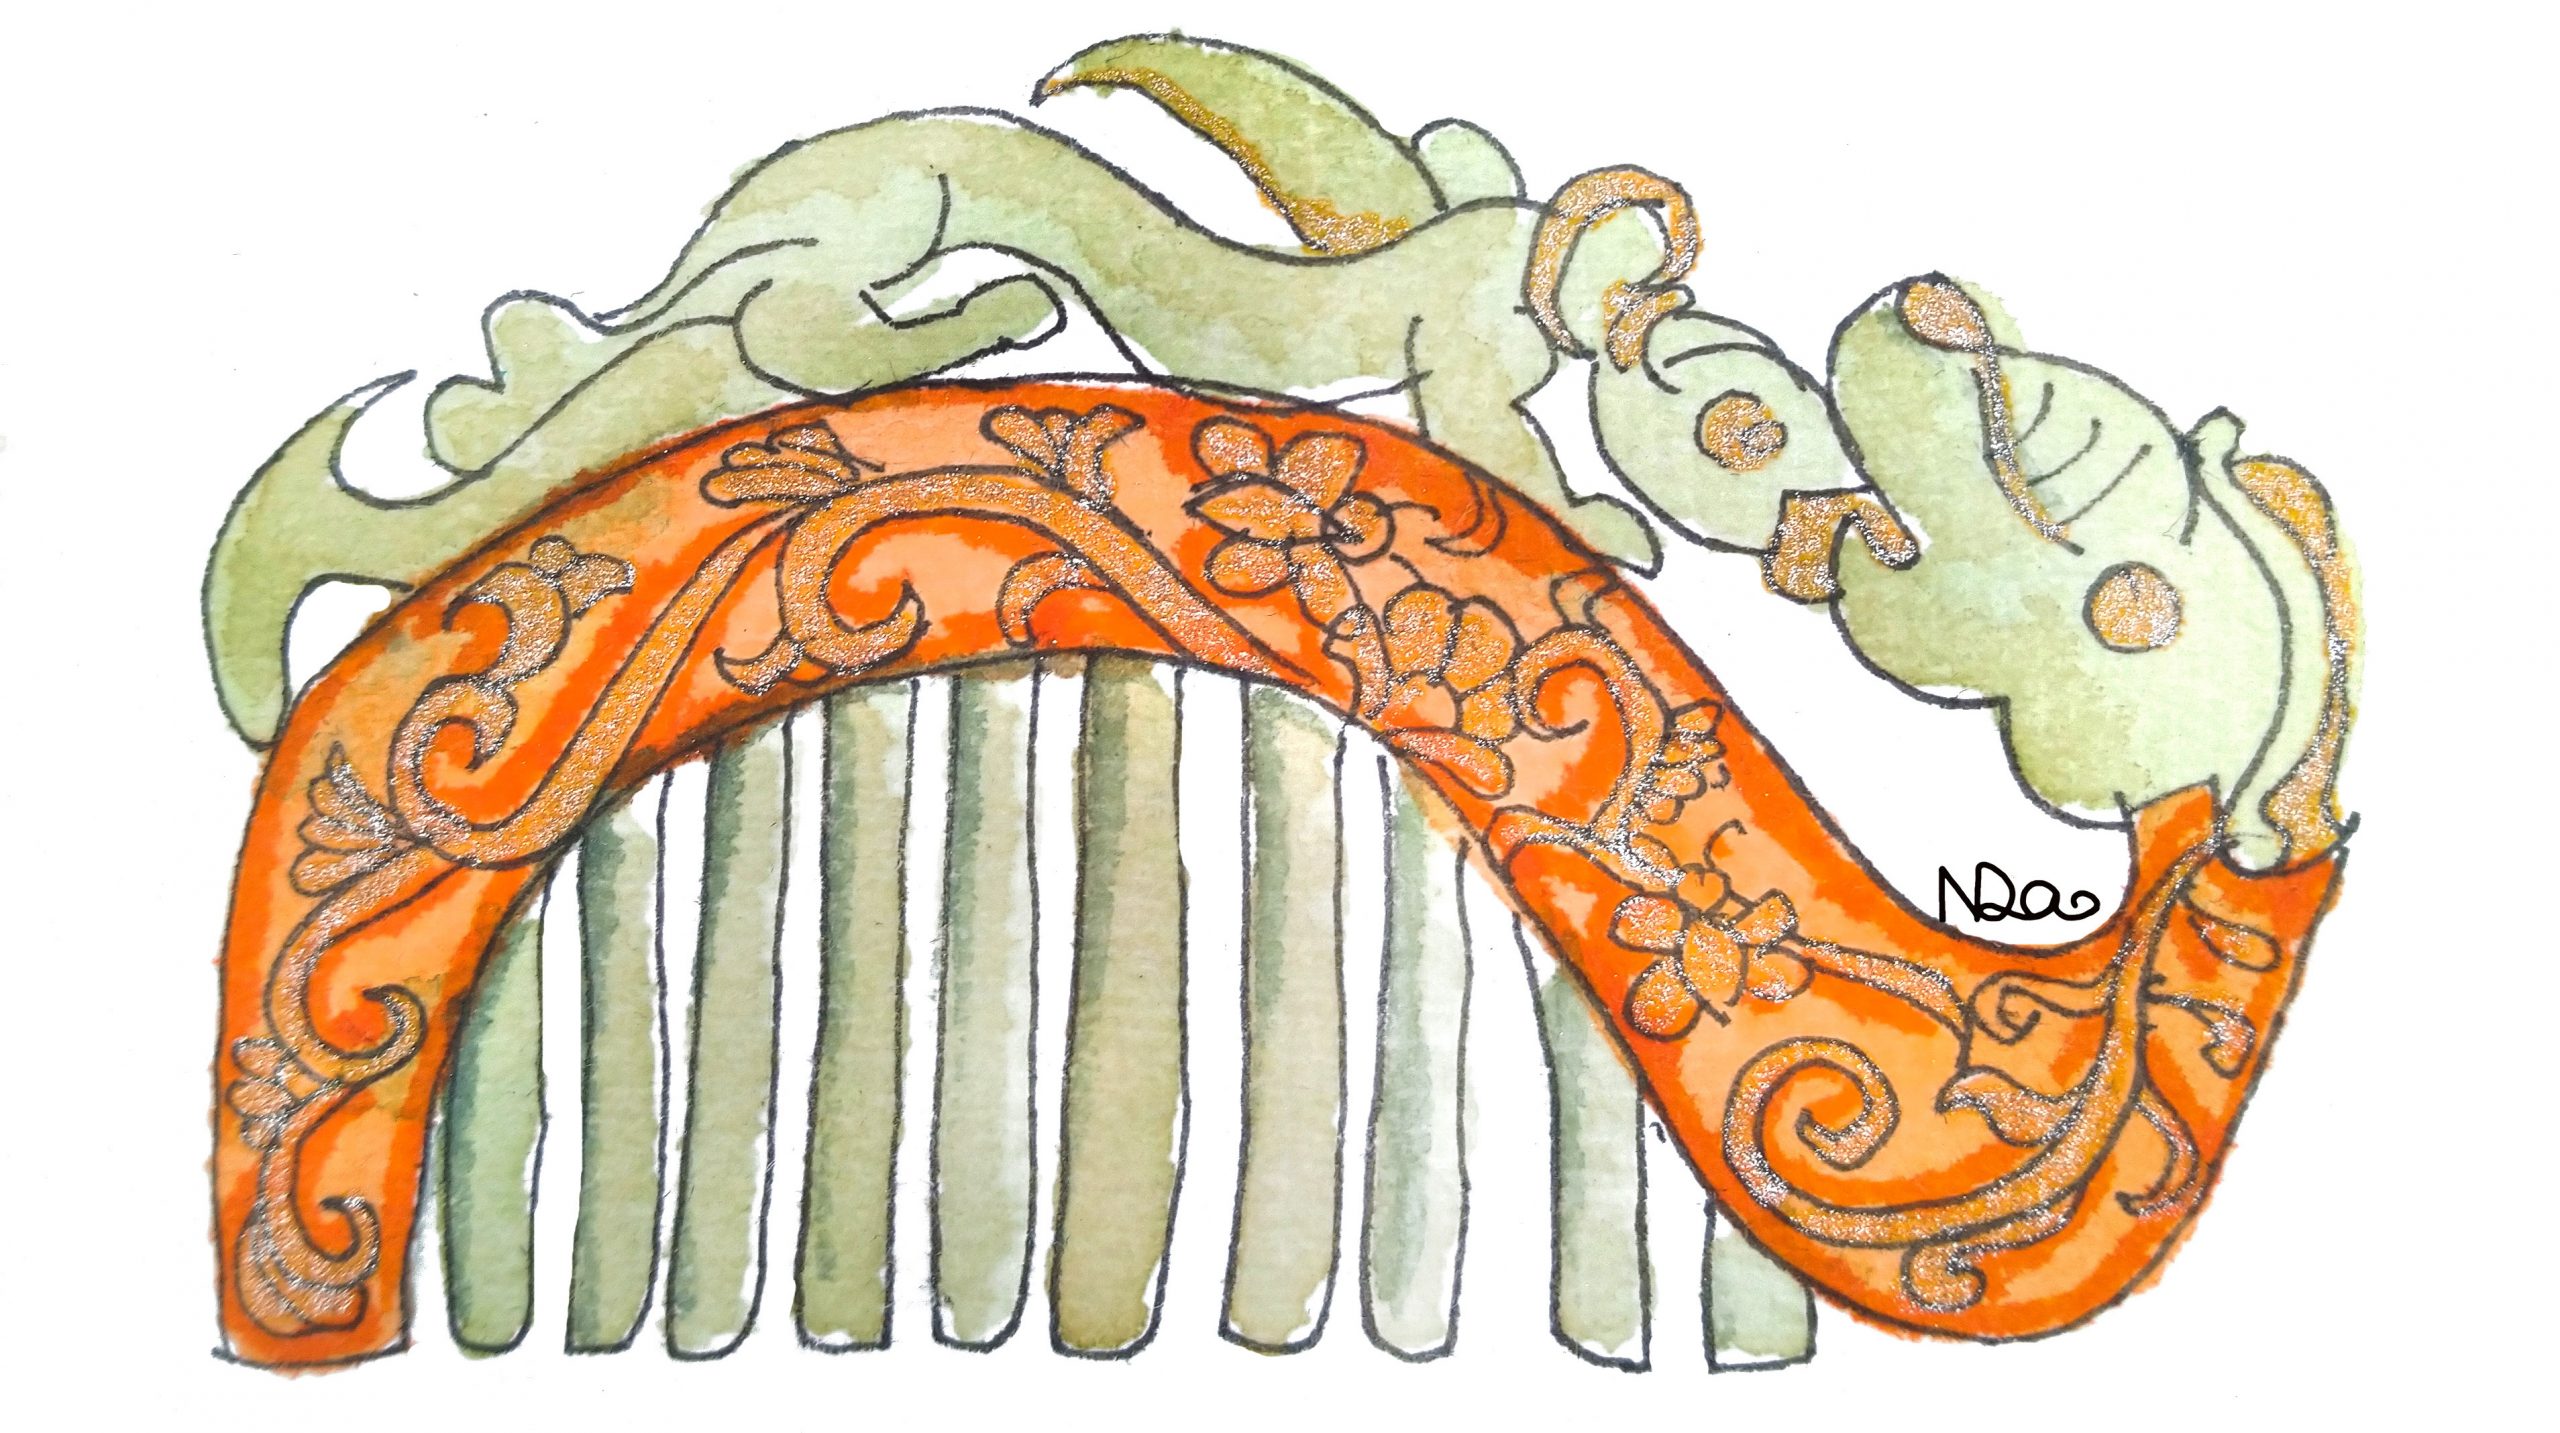 jade and gold comb illustration